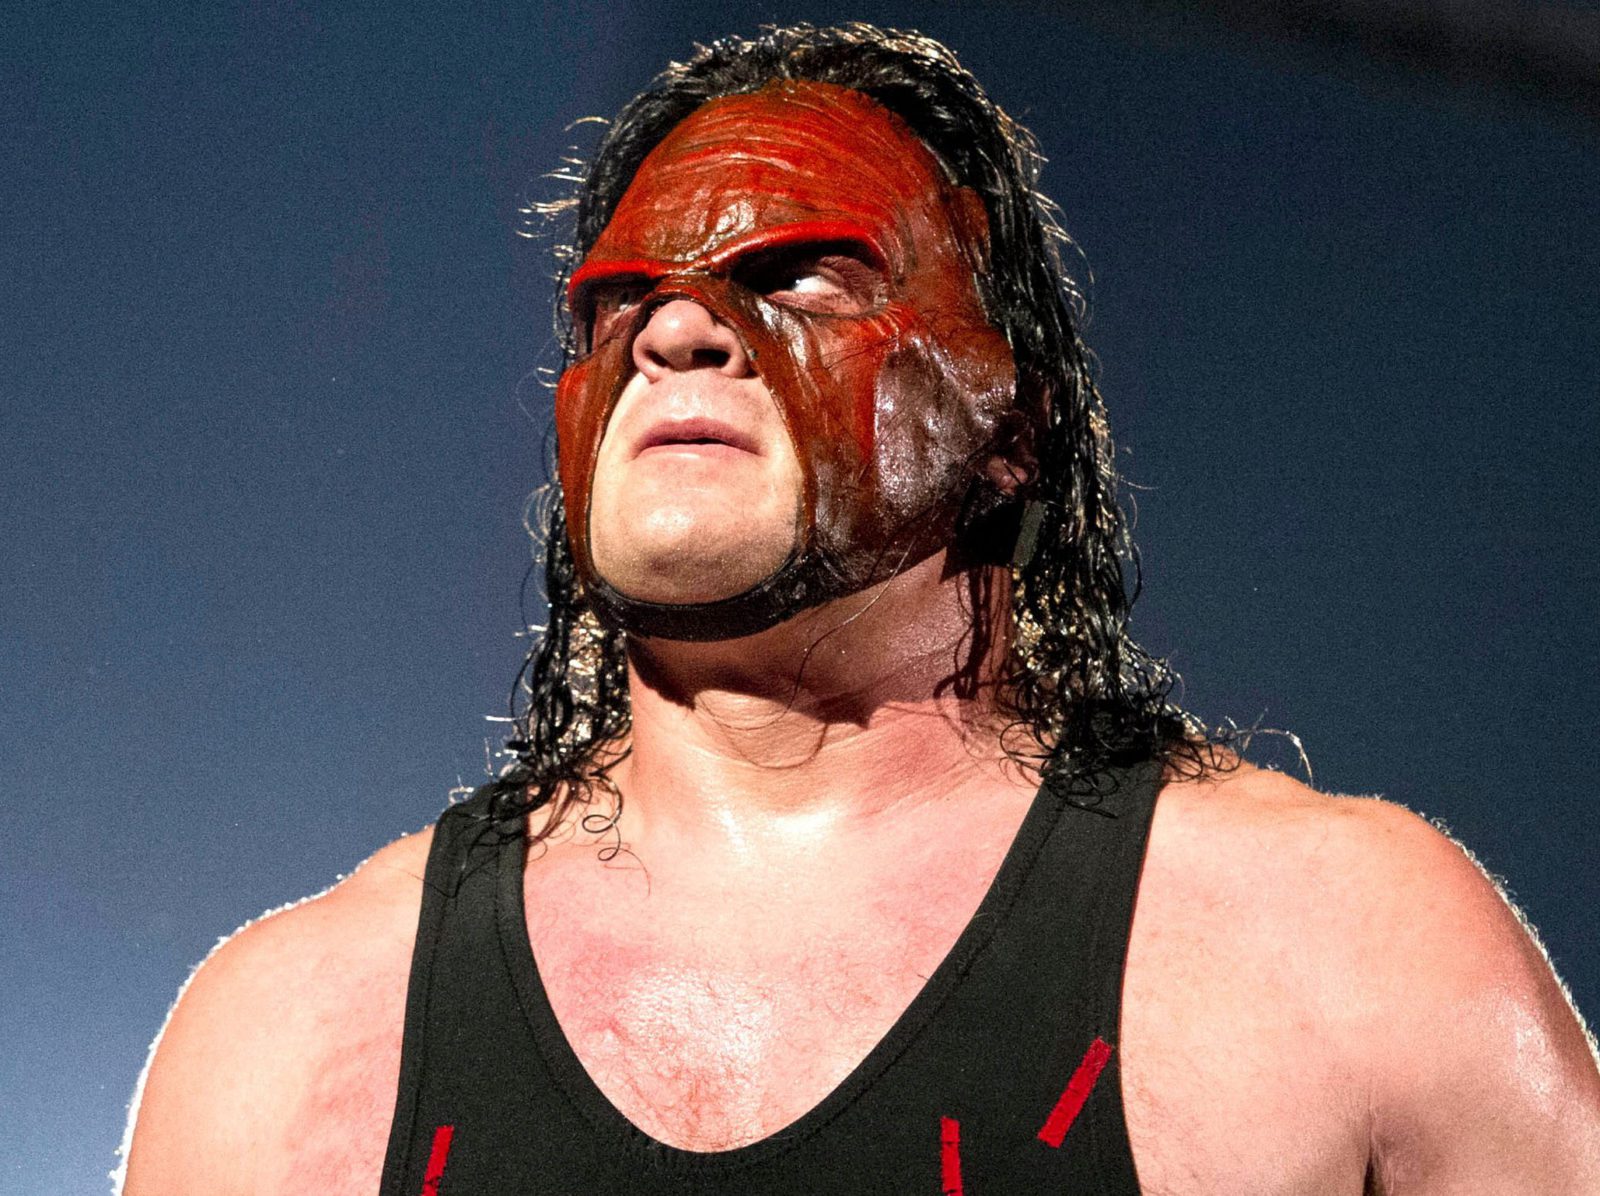 Kane became one of the most iconic wrestlers around!